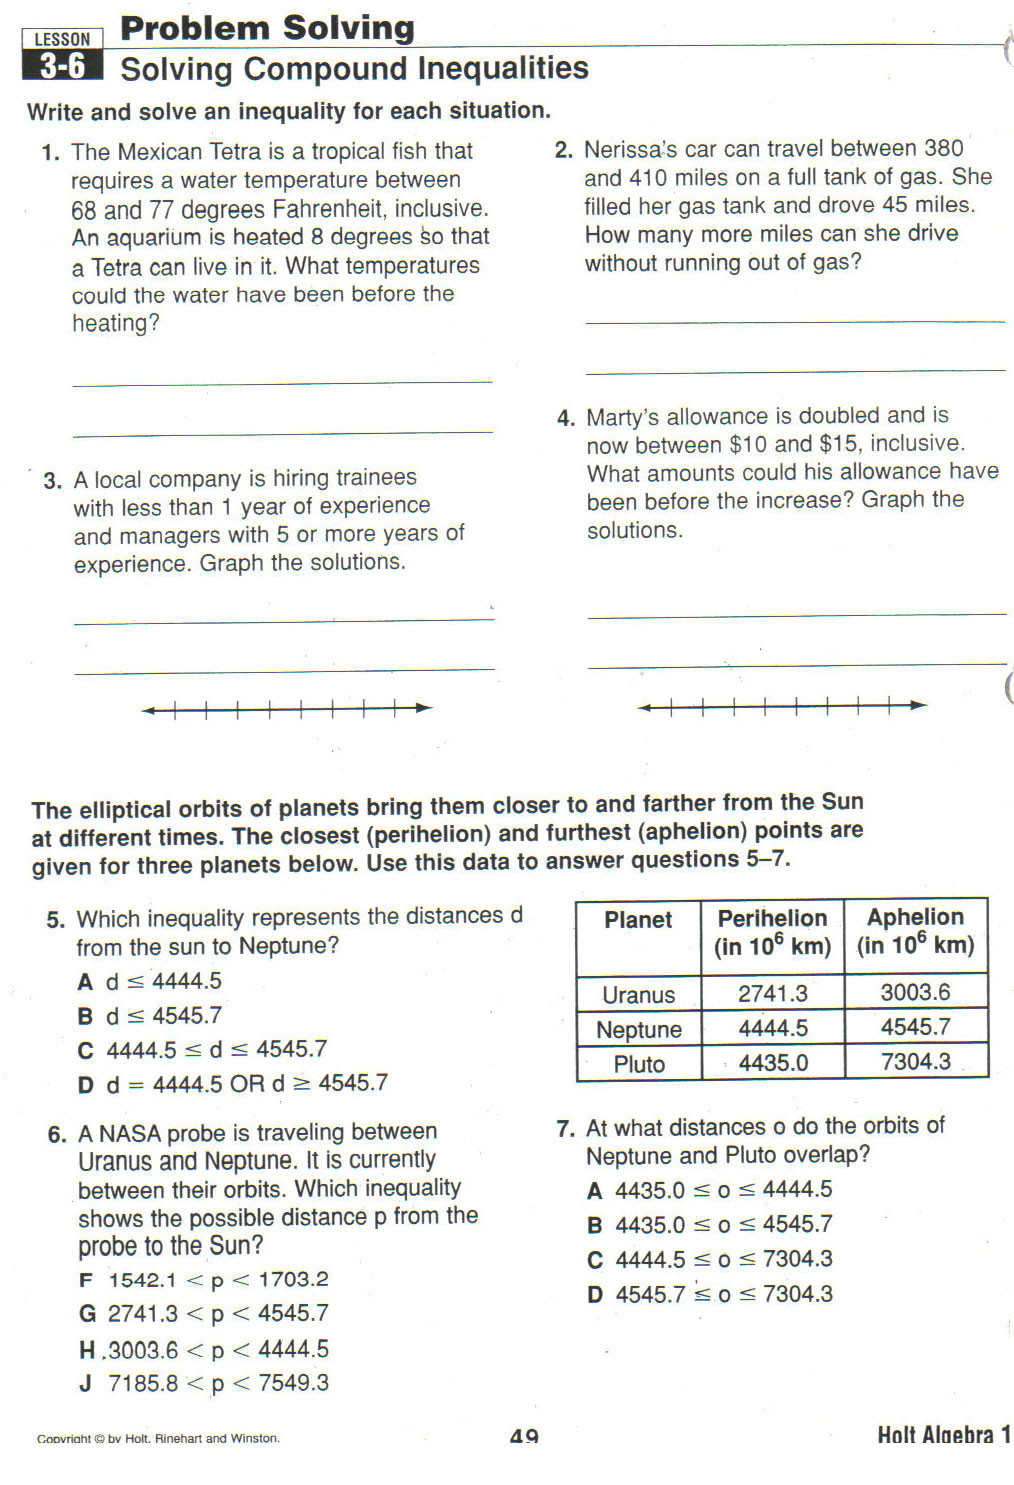 Solving Compound Inequalities Worksheet Learning Experience